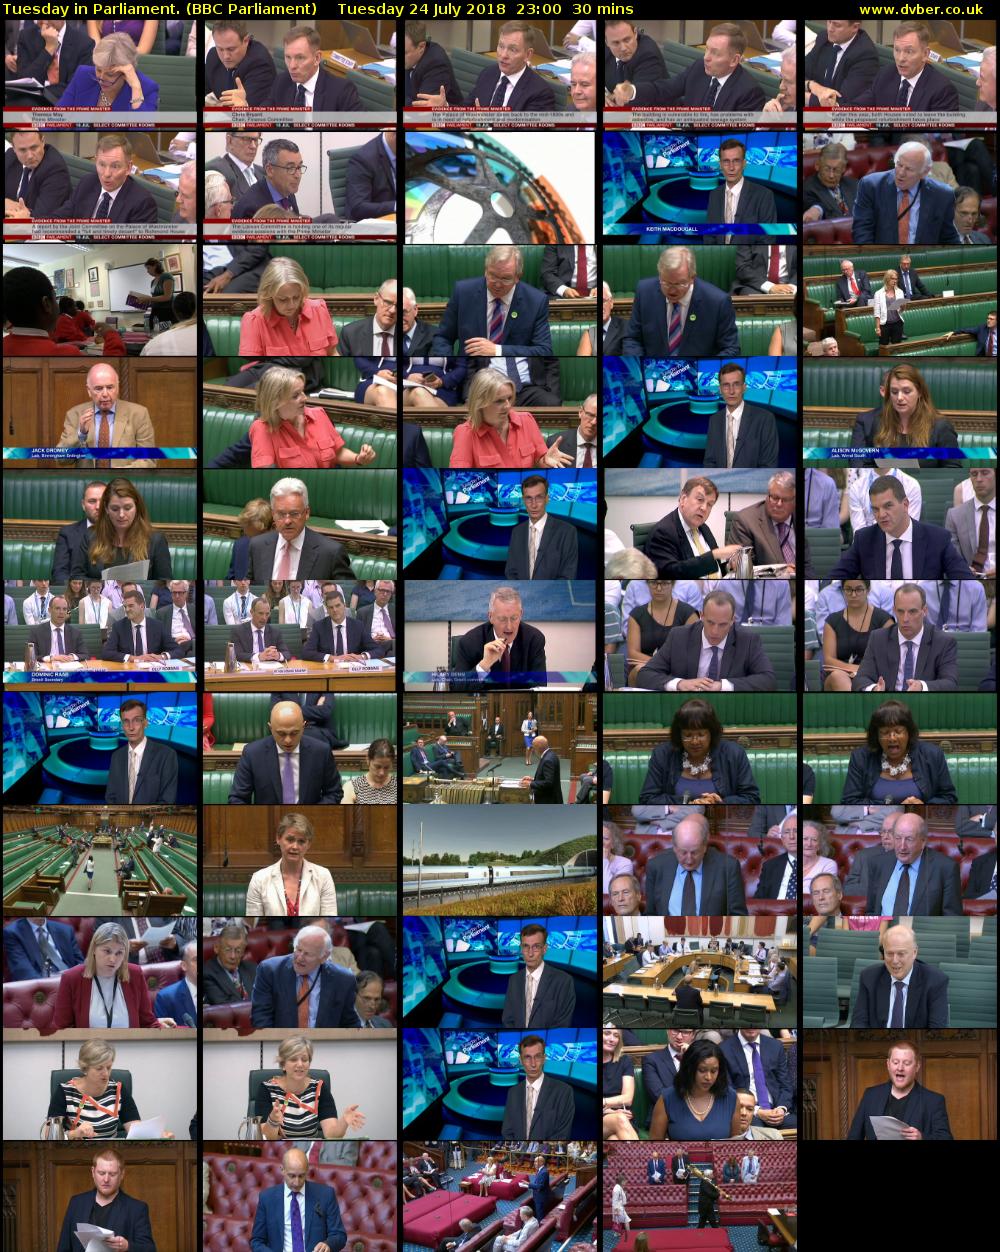 Tuesday in Parliament. (BBC Parliament) Tuesday 24 July 2018 23:00 - 23:30